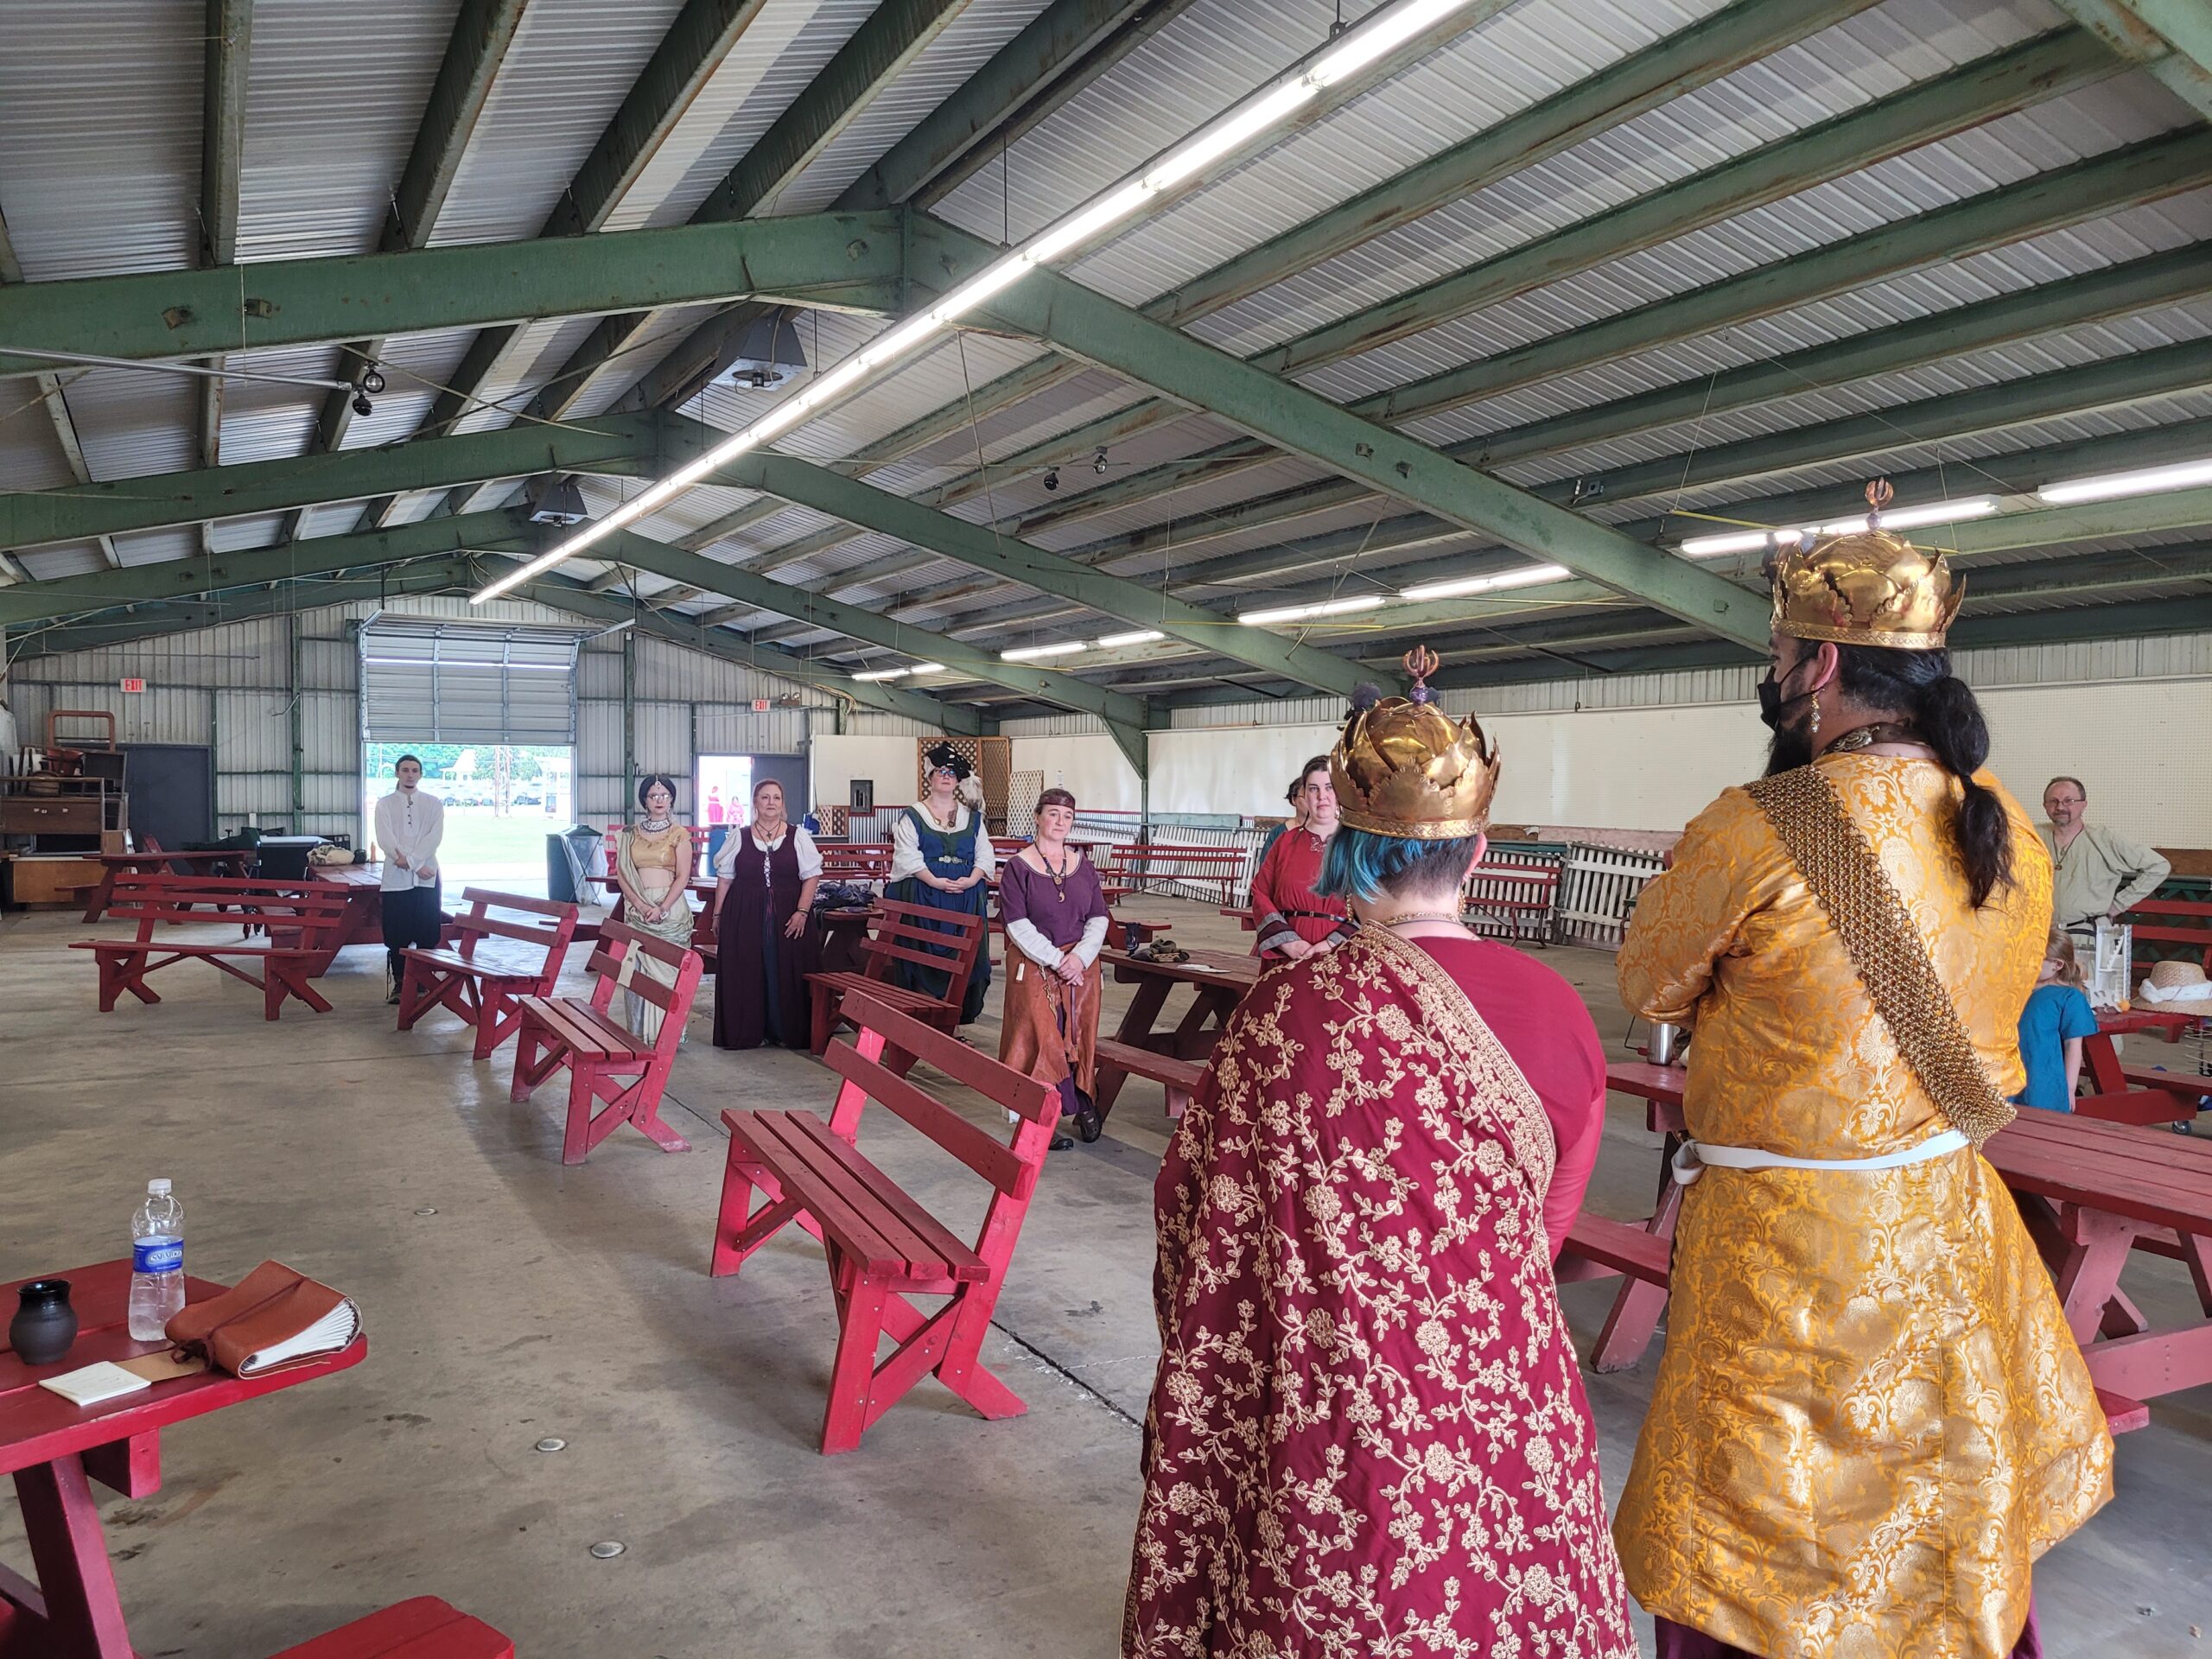 Their Majesties Address the competitors